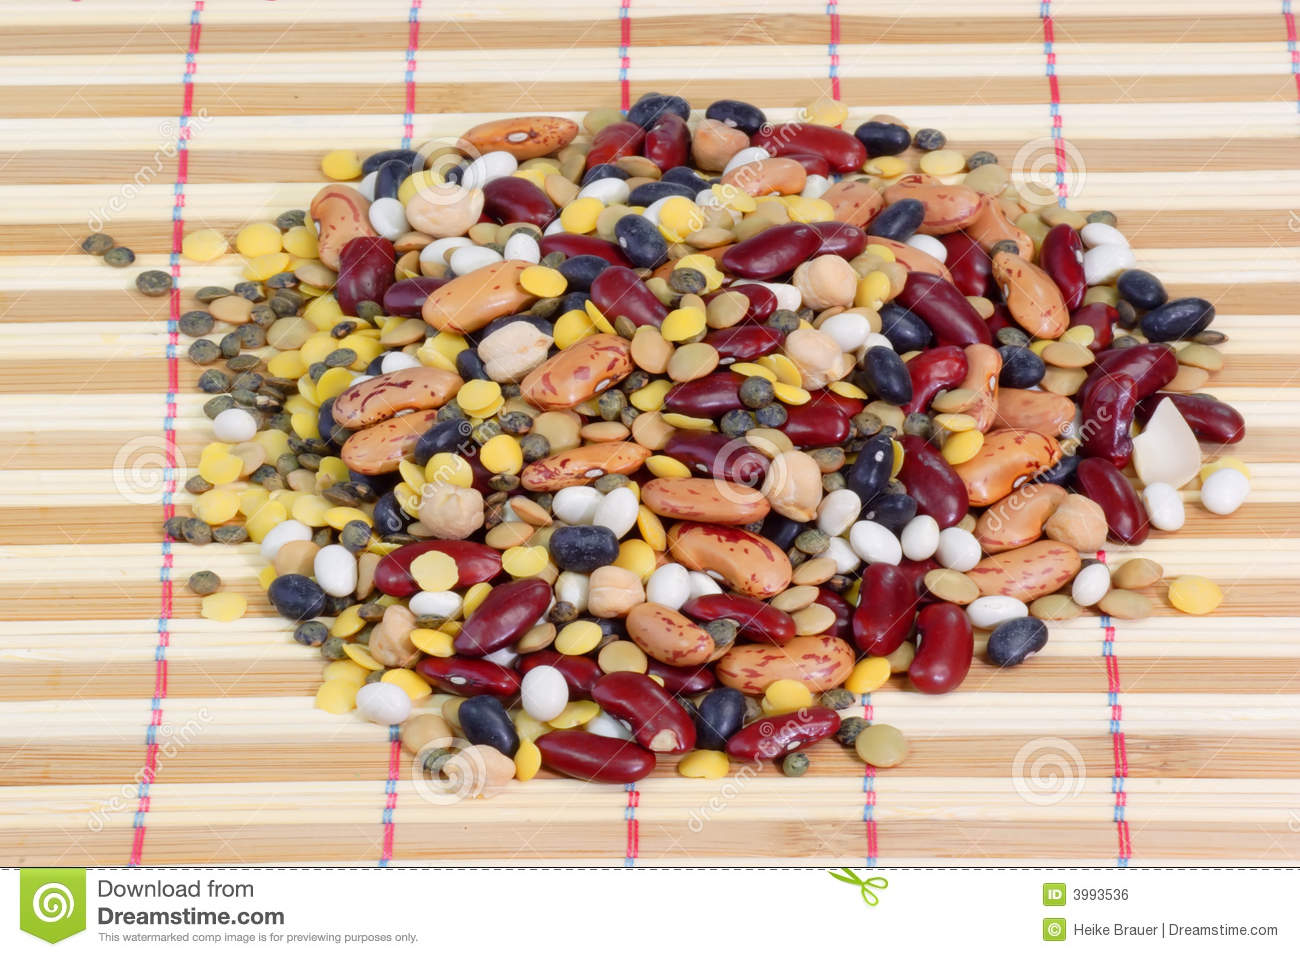 Mixed Dried Beans Royalty Free Stock Image   Image  3993536